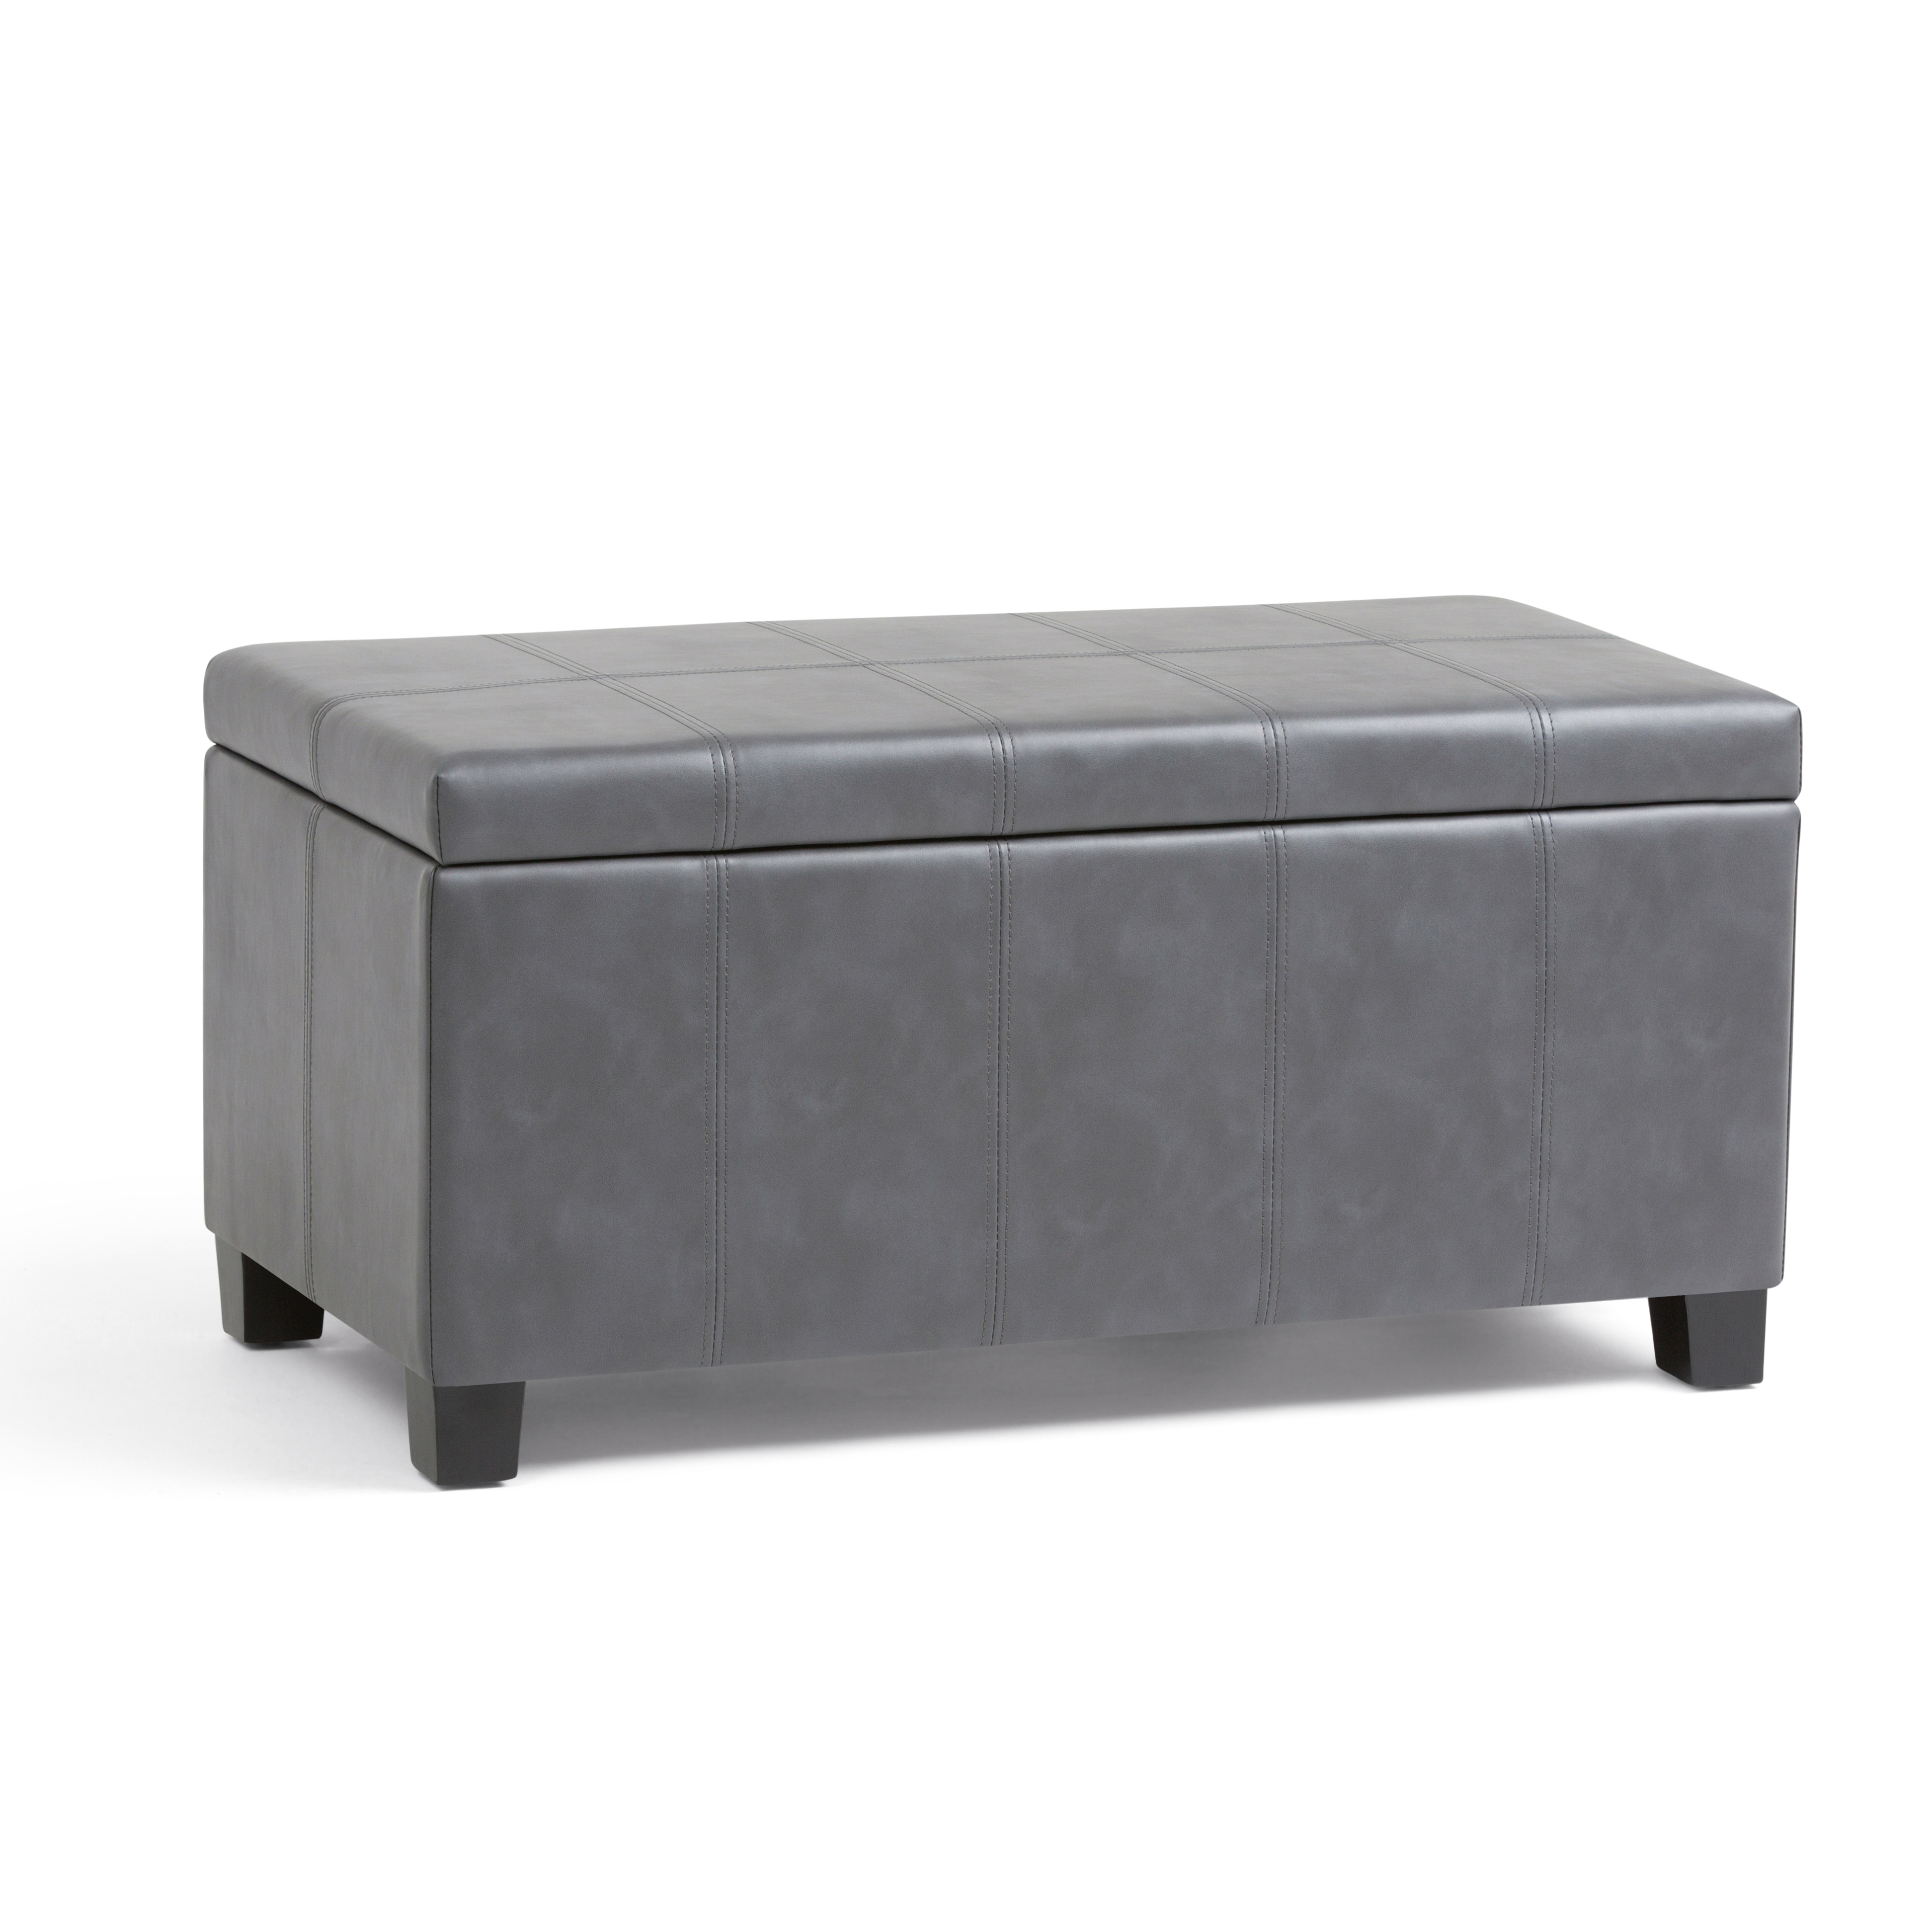 Simpli Home Dover Faux Leather Storage, Grey Leather Storage Bench